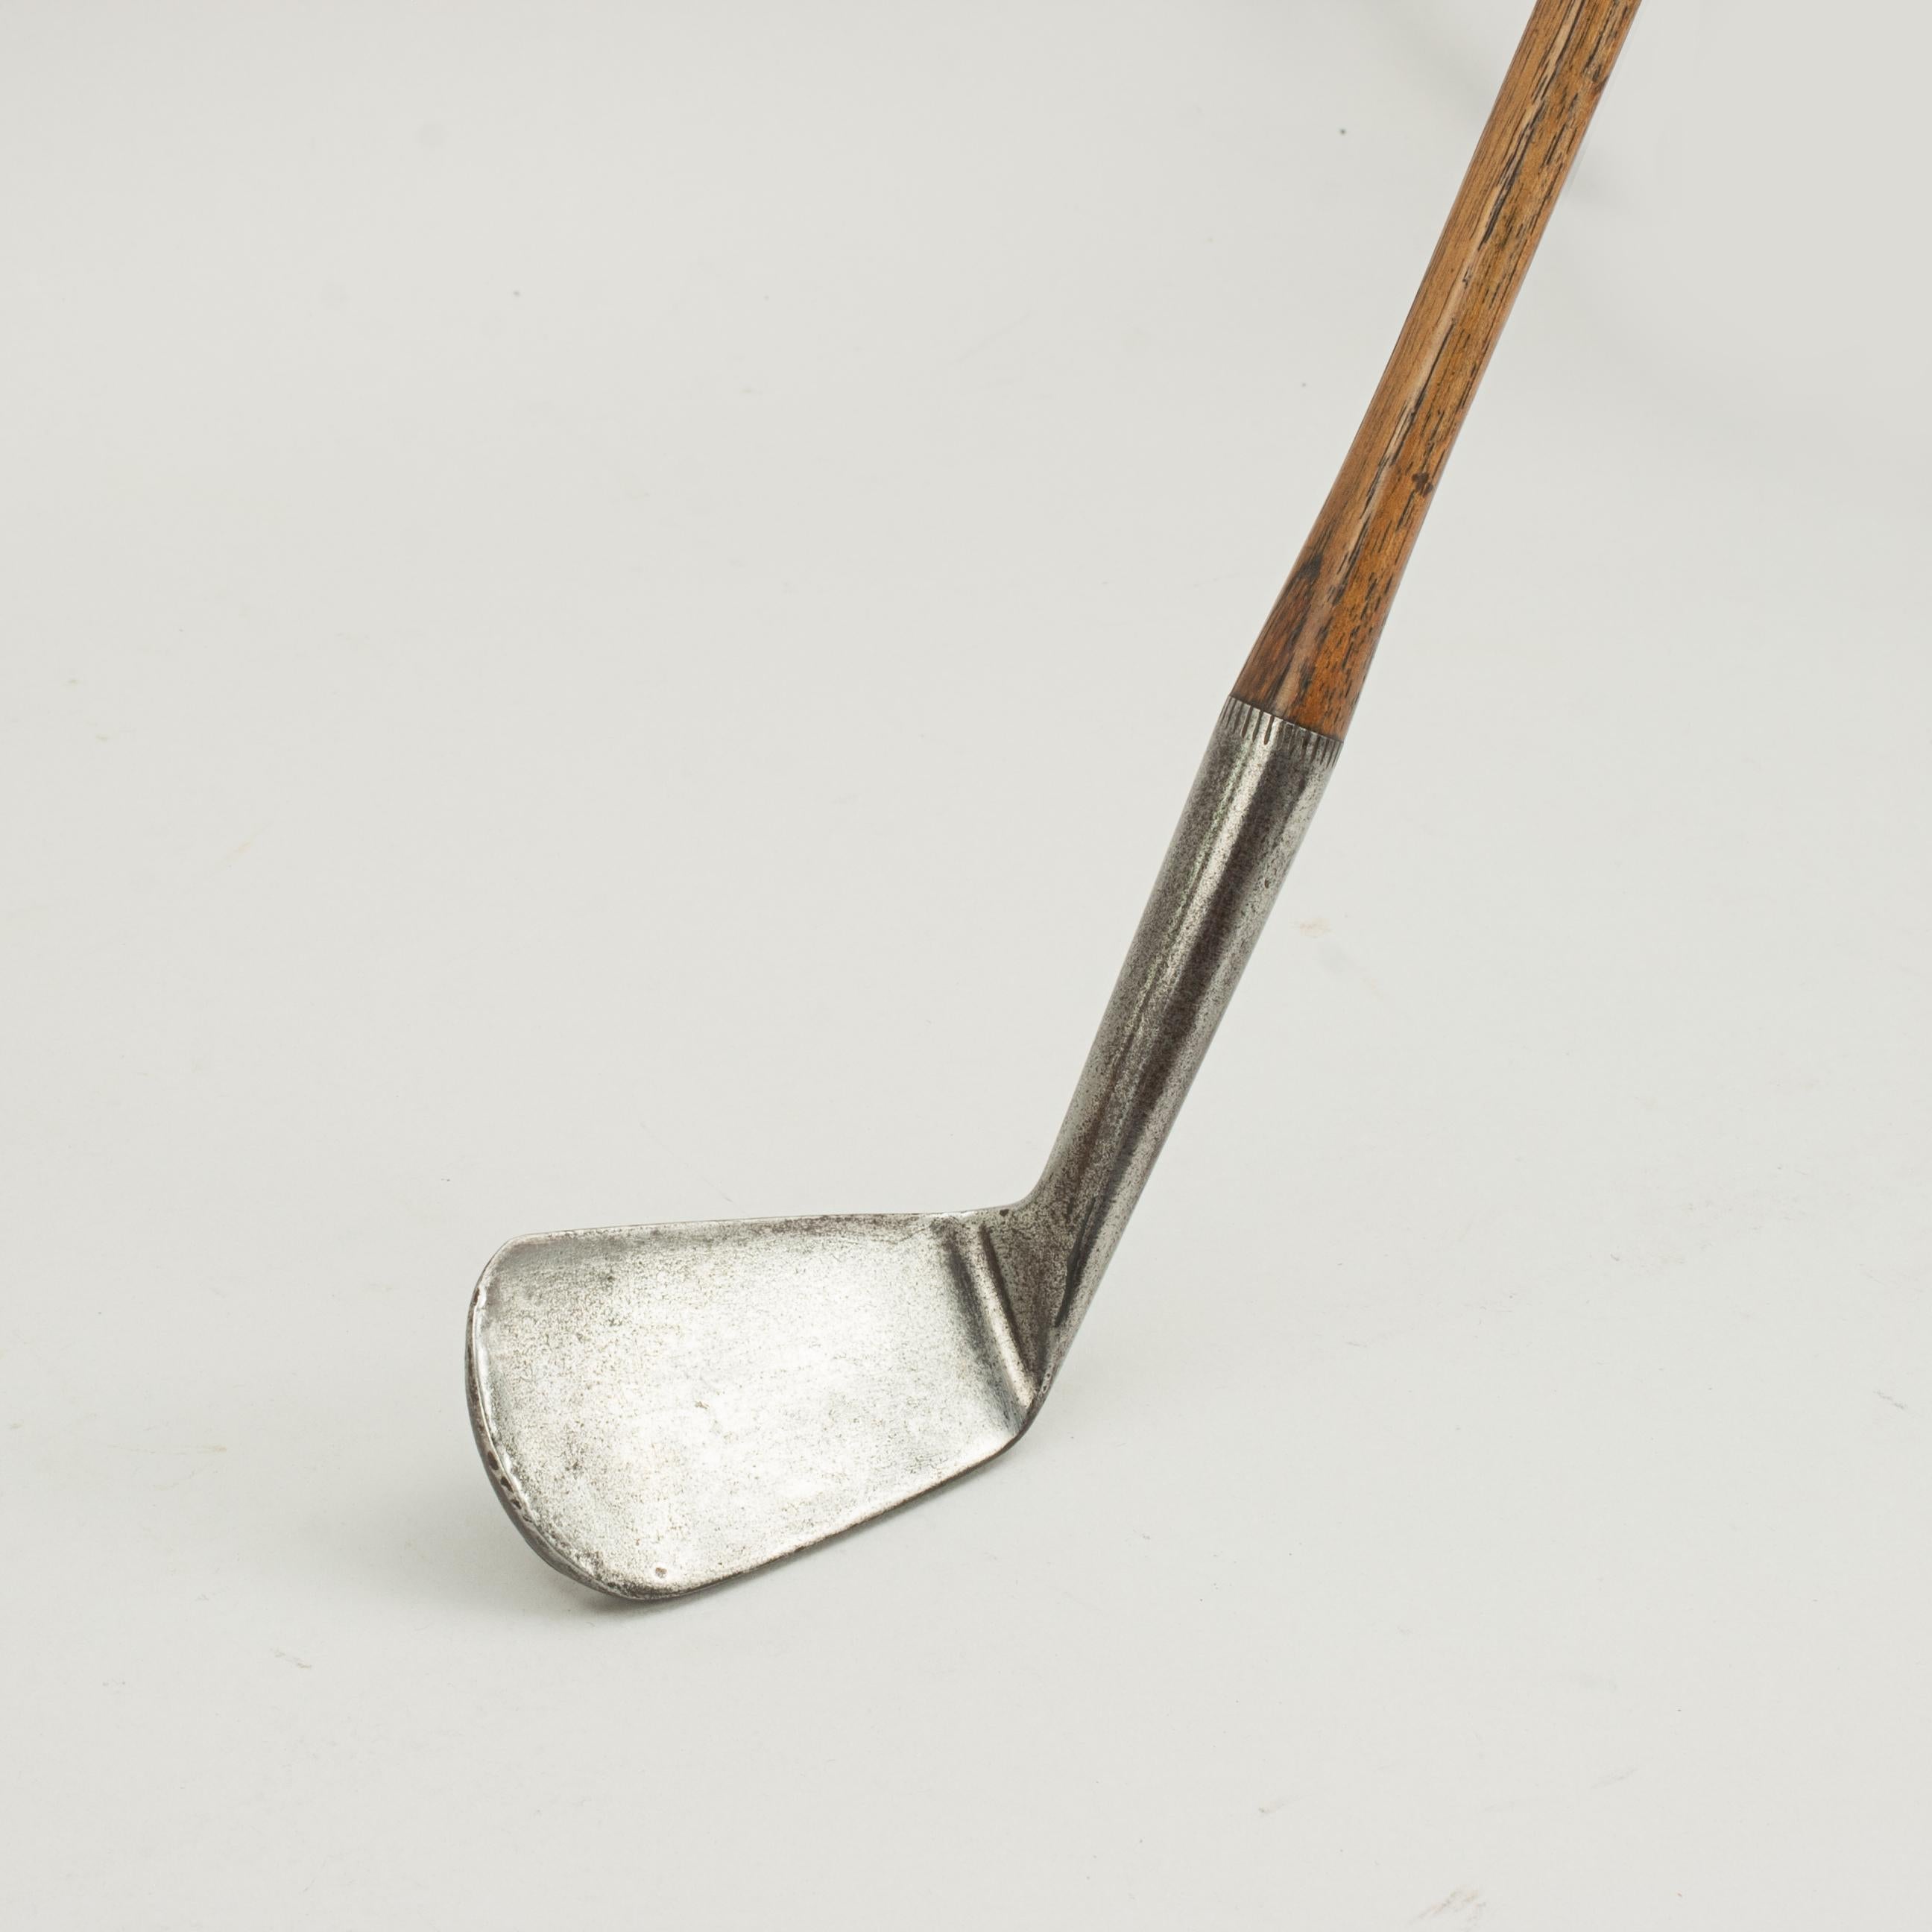 Hickory shafted spalding mashie golf club.
A very nice deep face Mashie with hickory shaft and later rubber type grip by A.G. Spalding & Bros. The smooth face head is stamped to the rear with Spalding's 'Anvil' cleek mark, 'Deep Face Mashie',